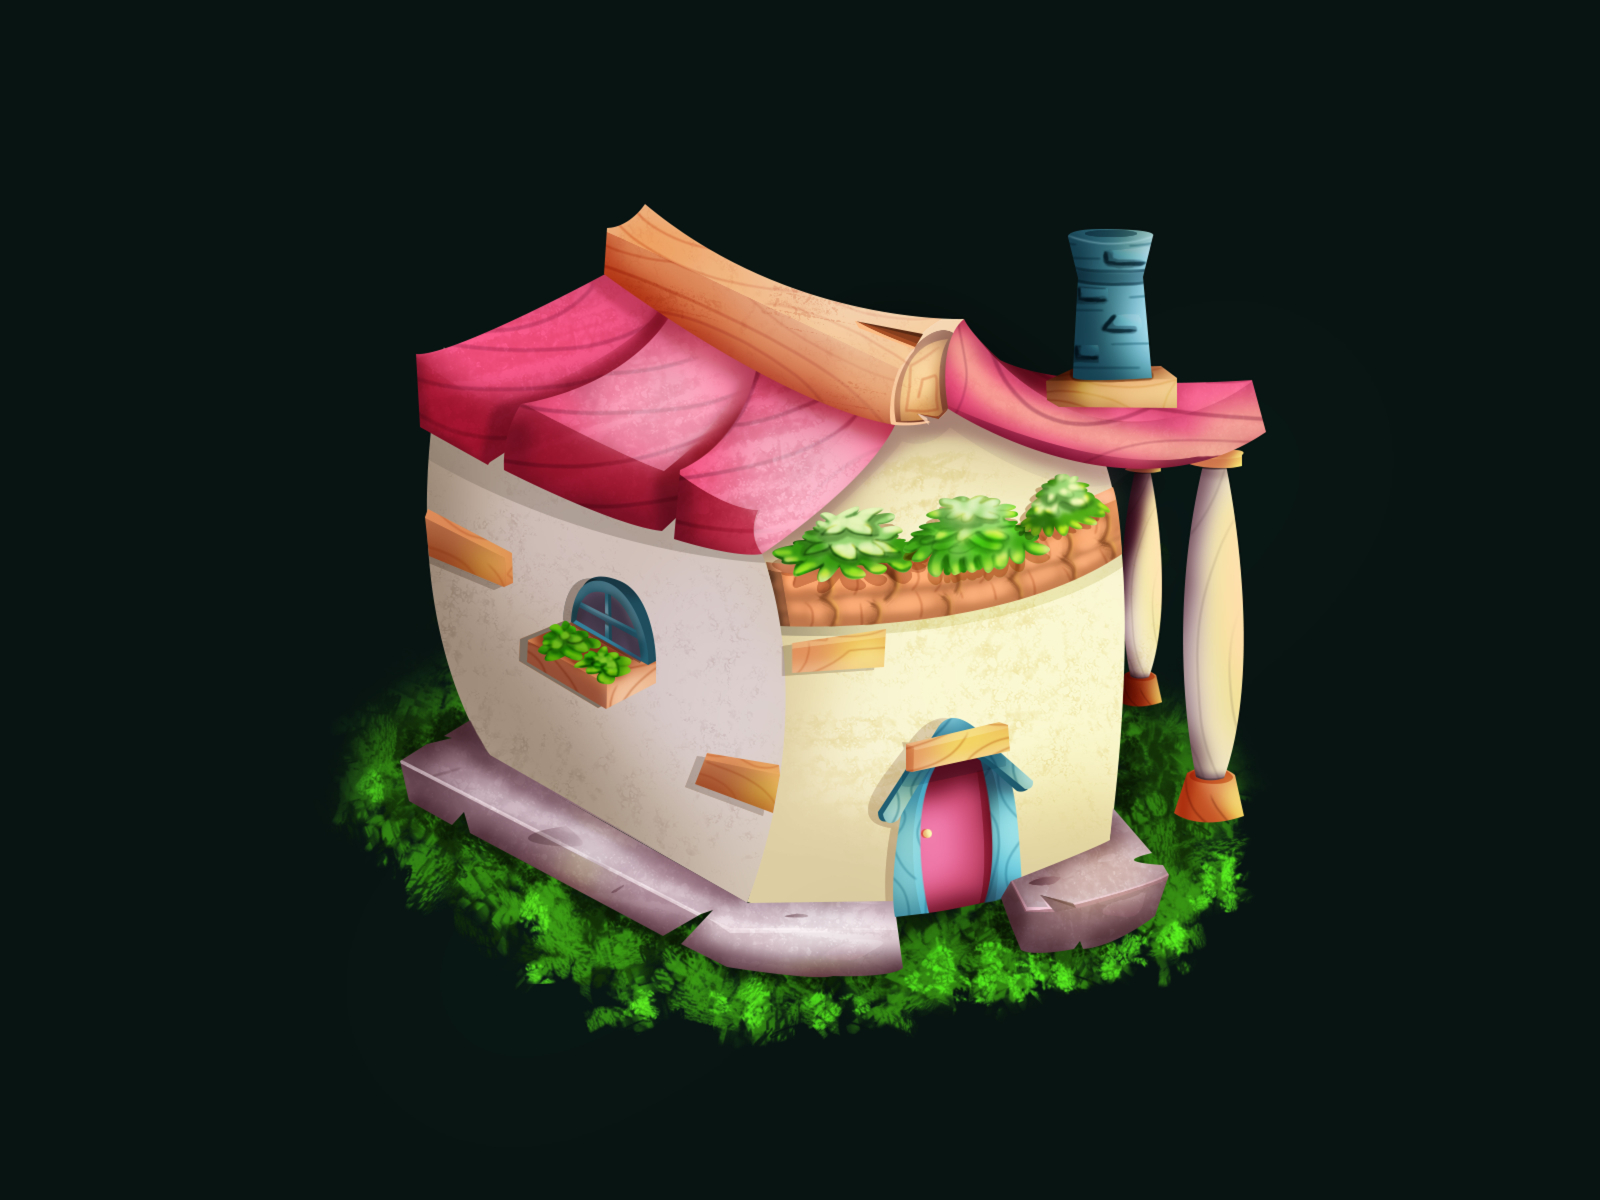 GAME HOUSE by Nopur Rajbongshi on Dribbble